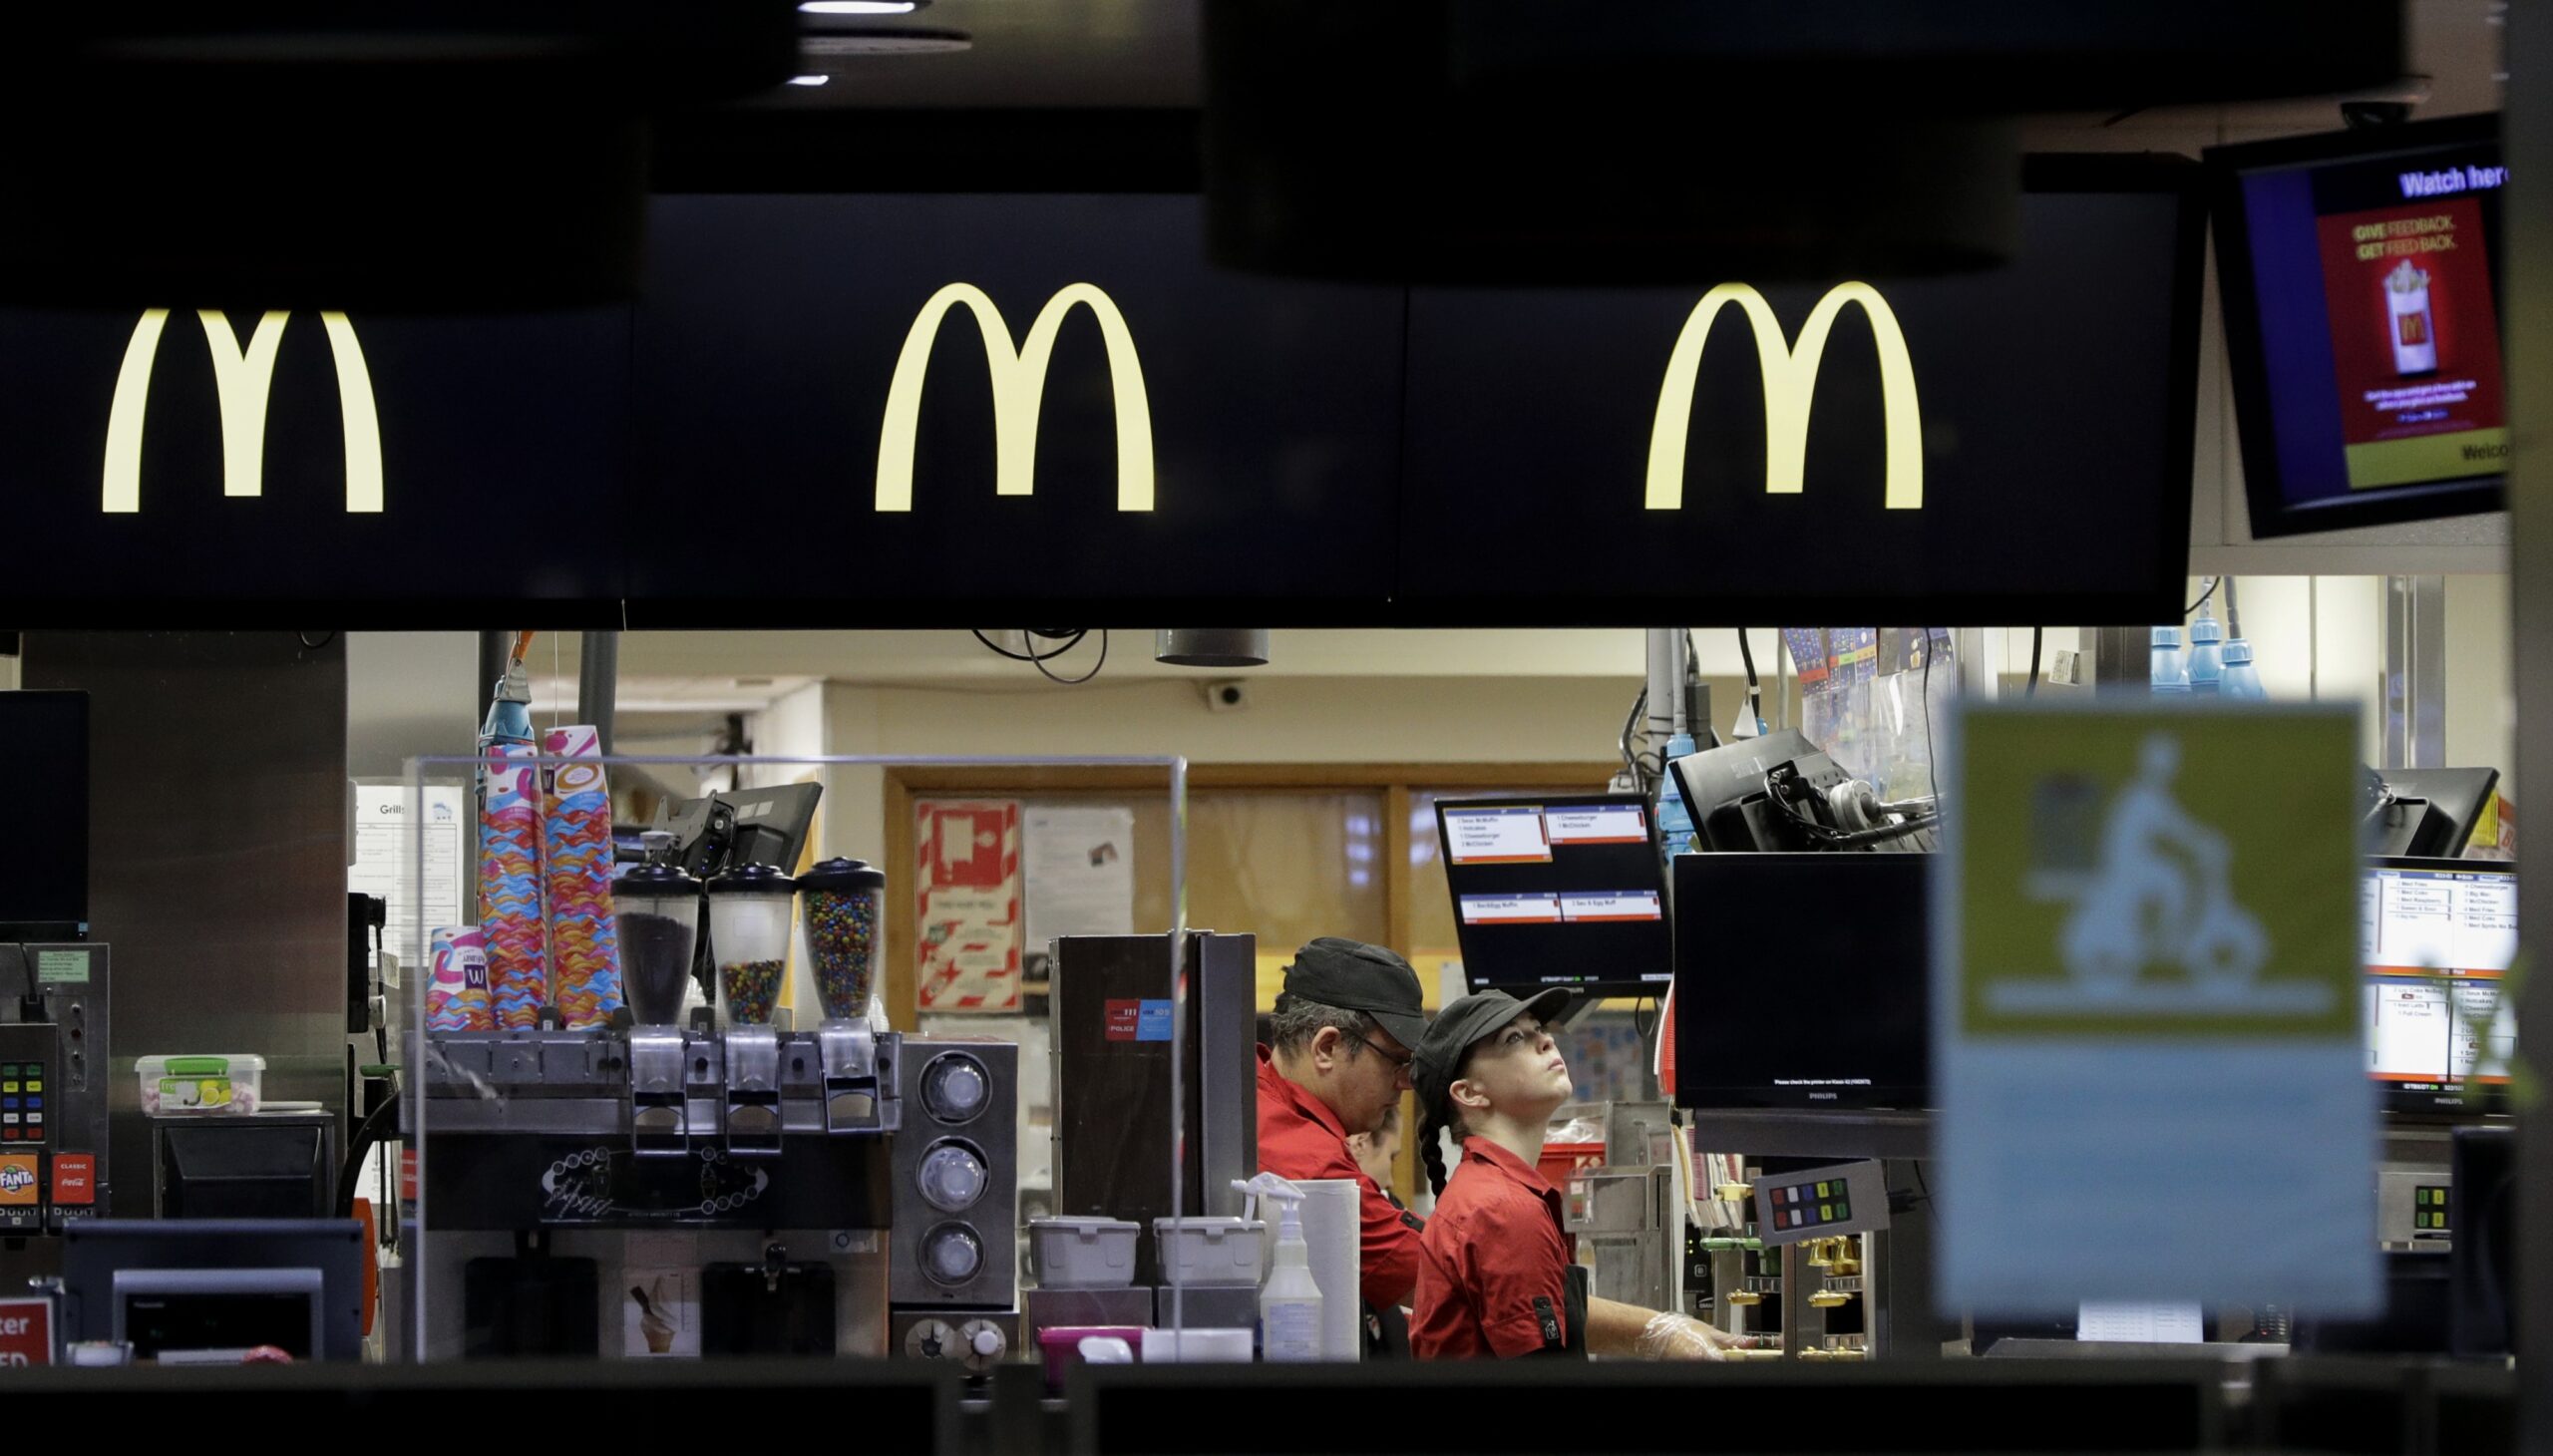 Workers at a McDonalds